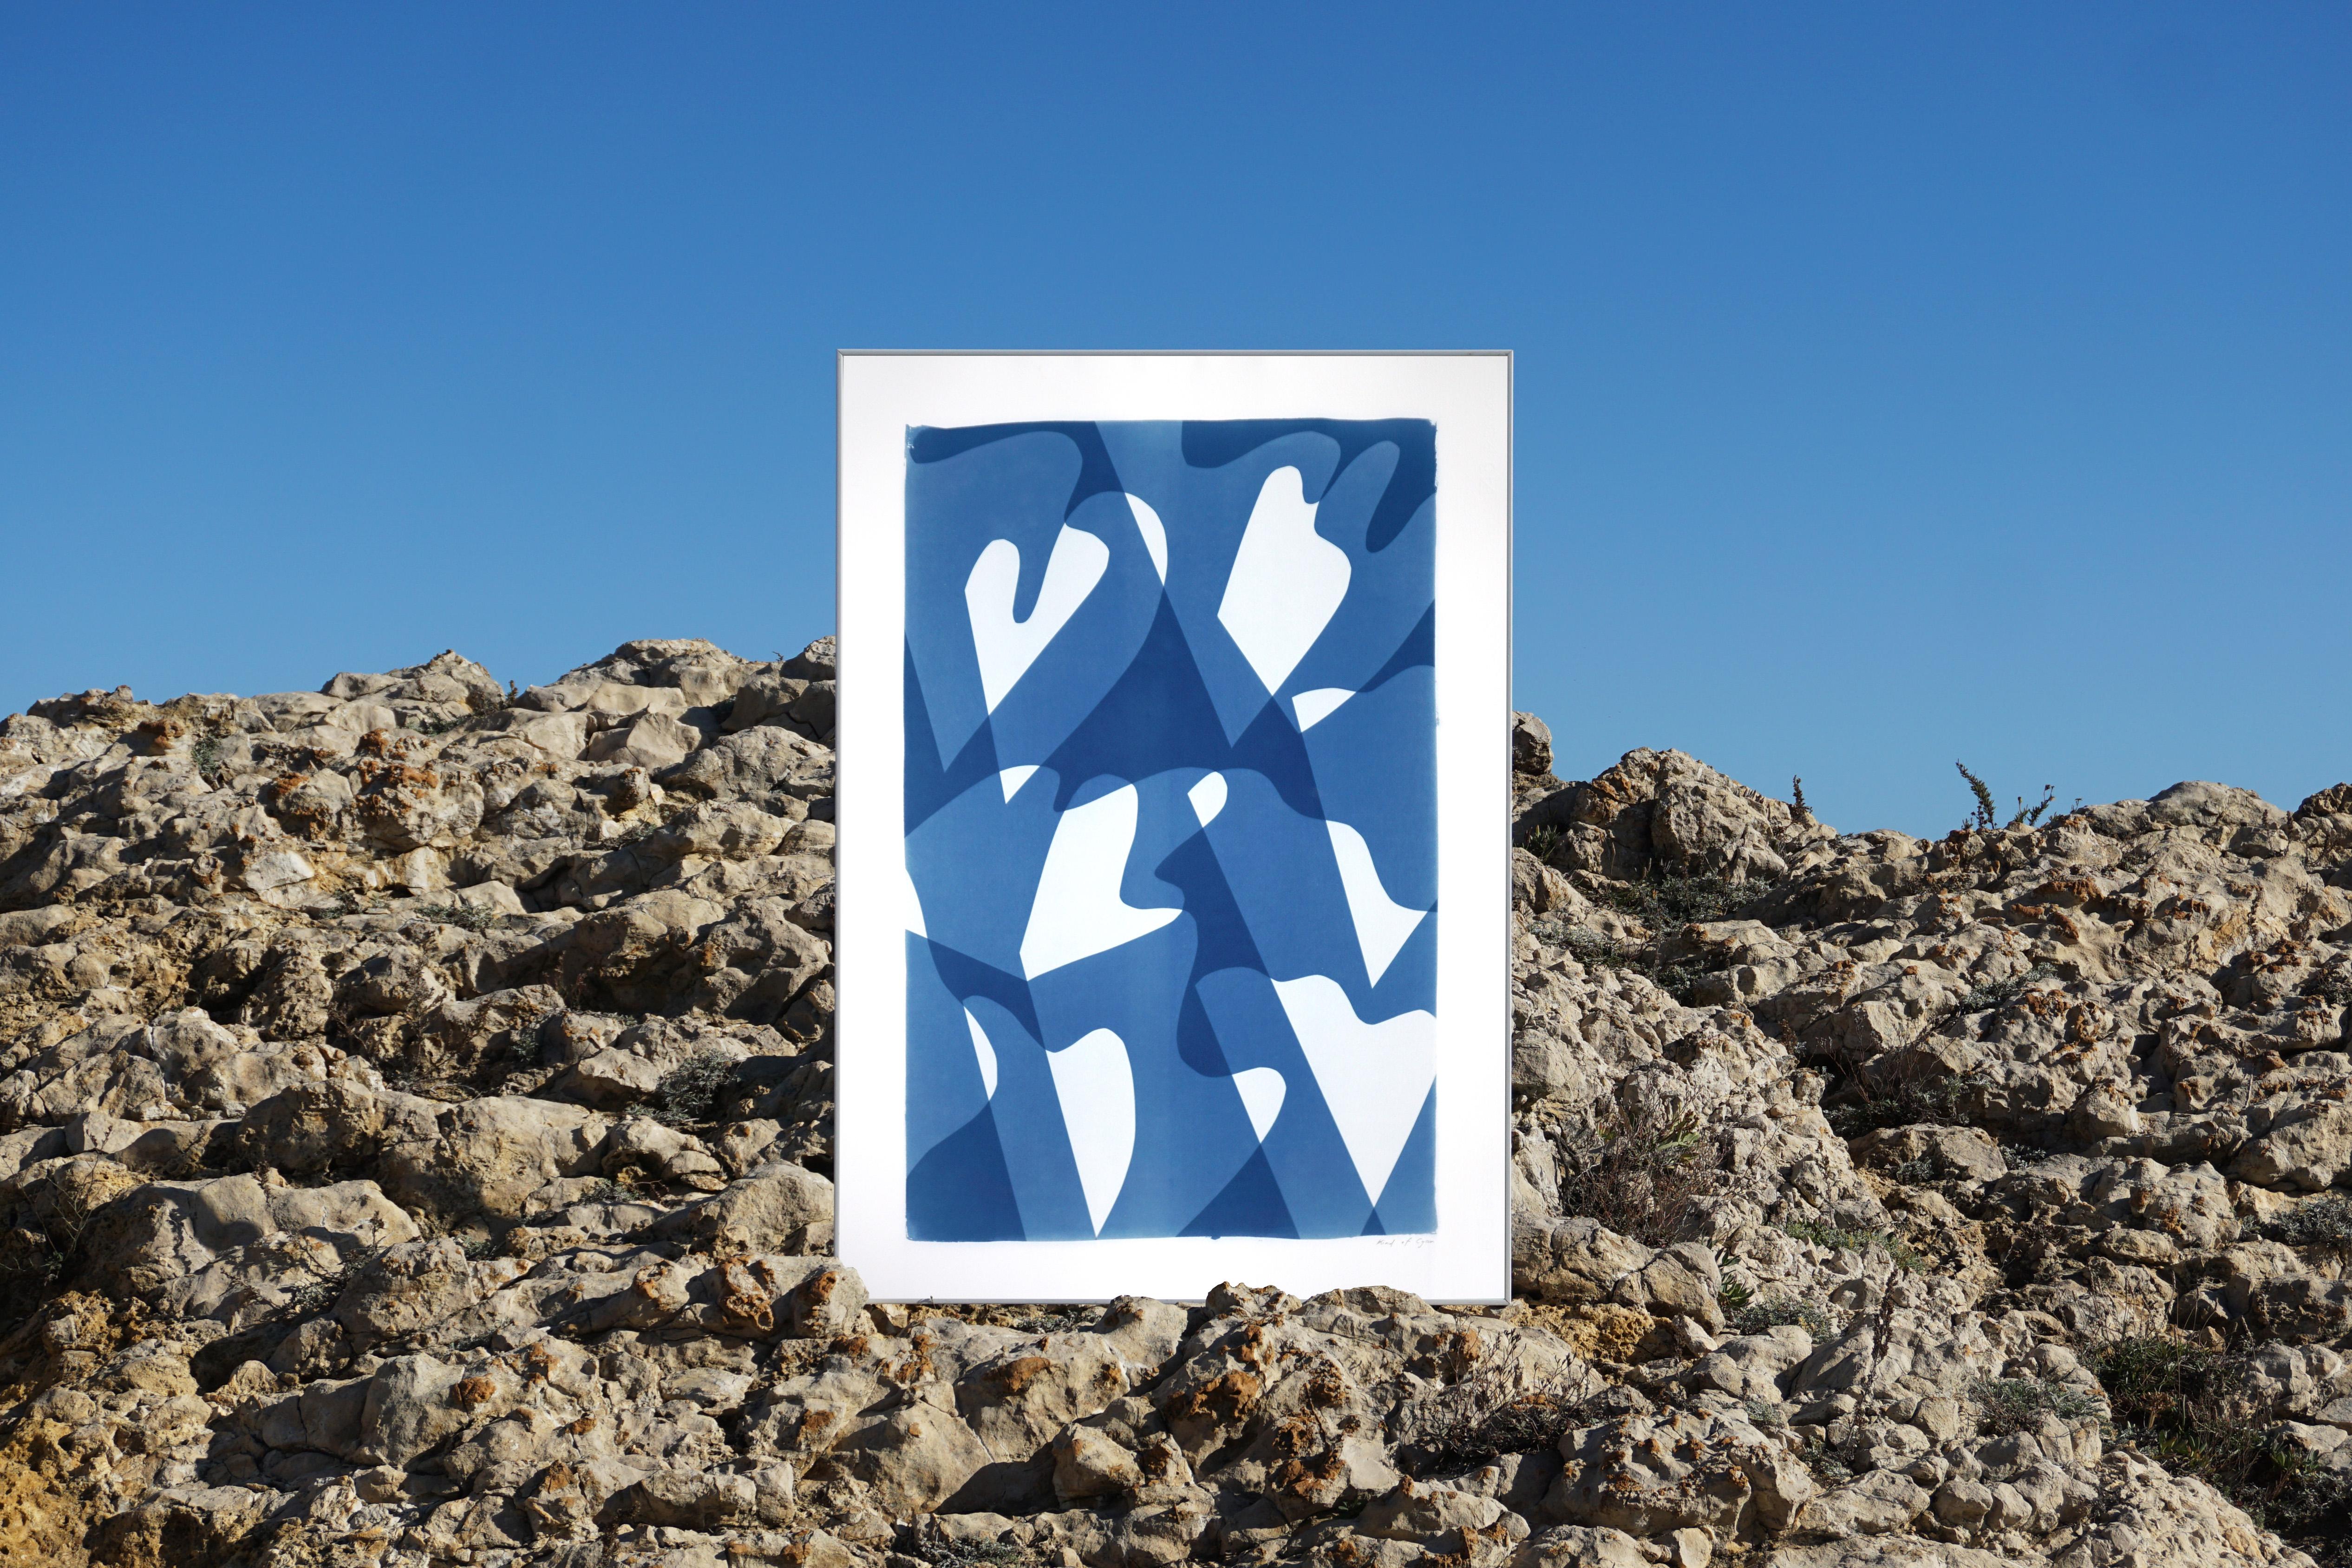 Wind over Waters, Blue and White Monotype, Abstract Modern Shapes and Layers - Photograph by Kind of Cyan